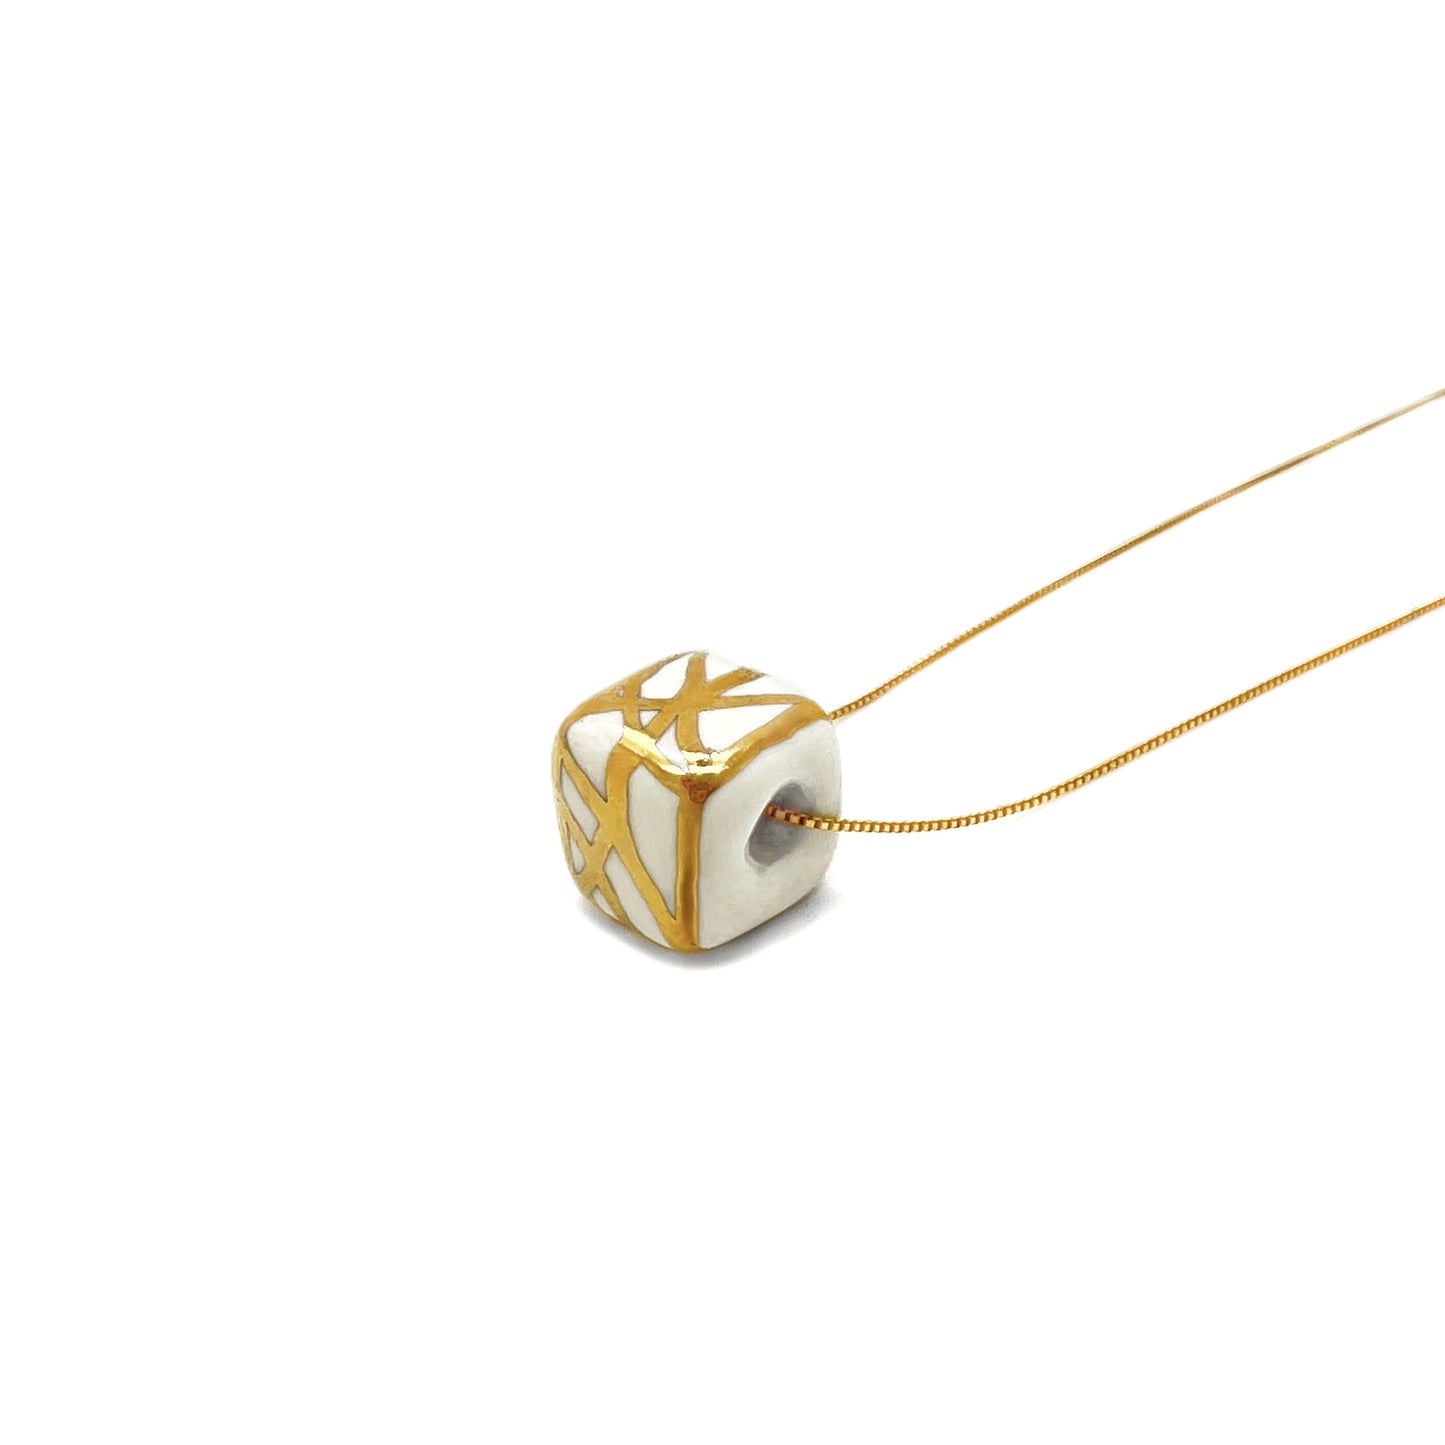 Ceramic pendant with white and gold abstract decoration